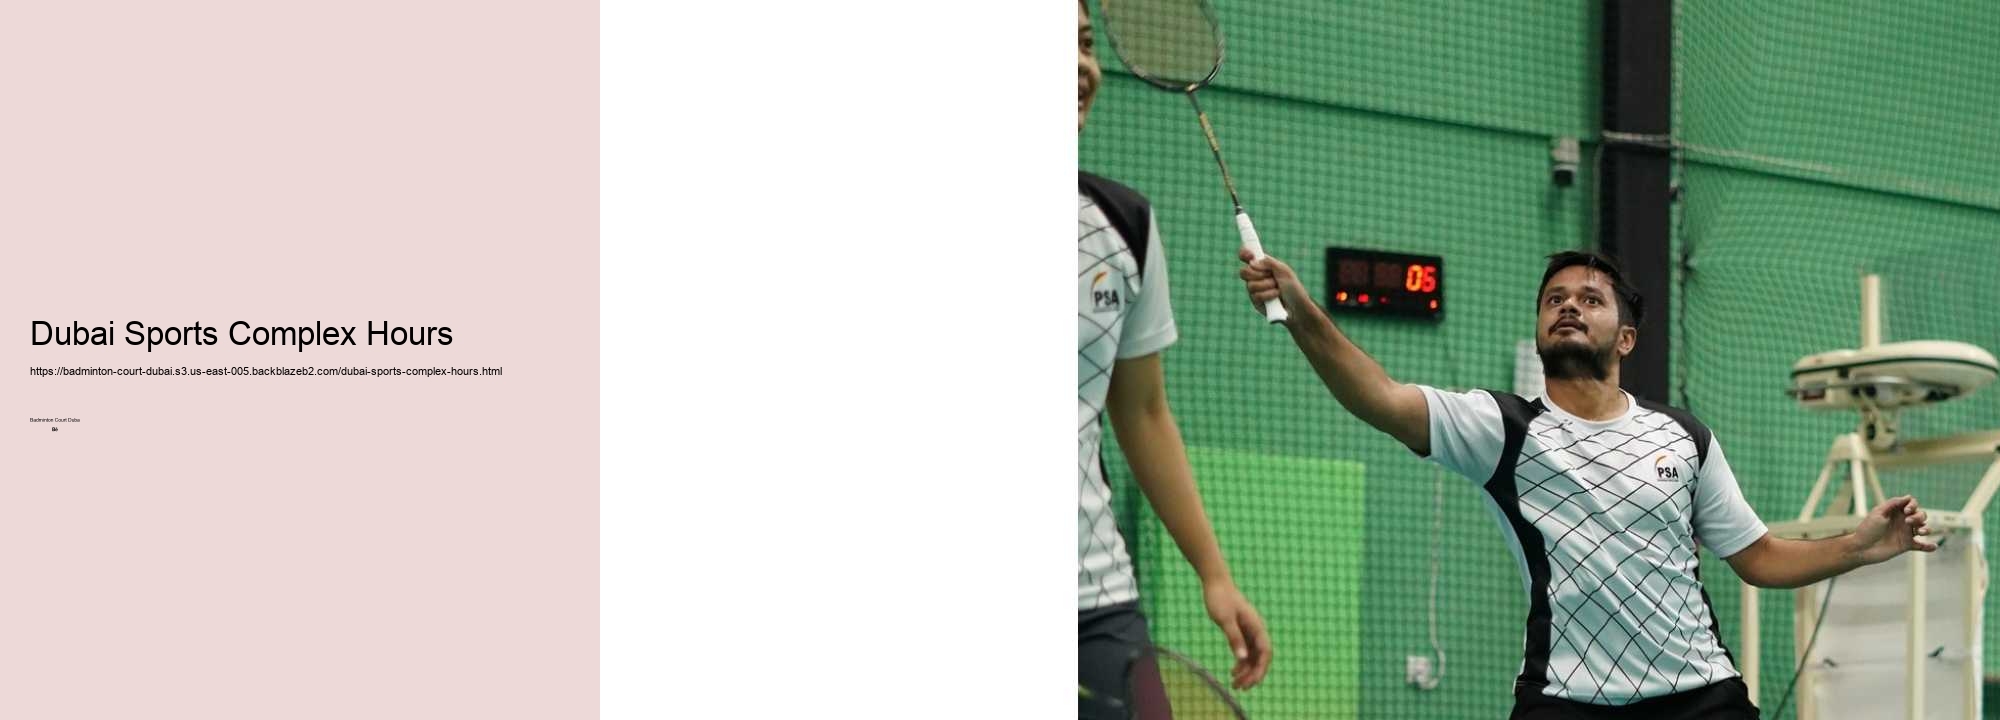 Training for Badminton in Dubai: Clubs, Coaches, and Facilities Review.